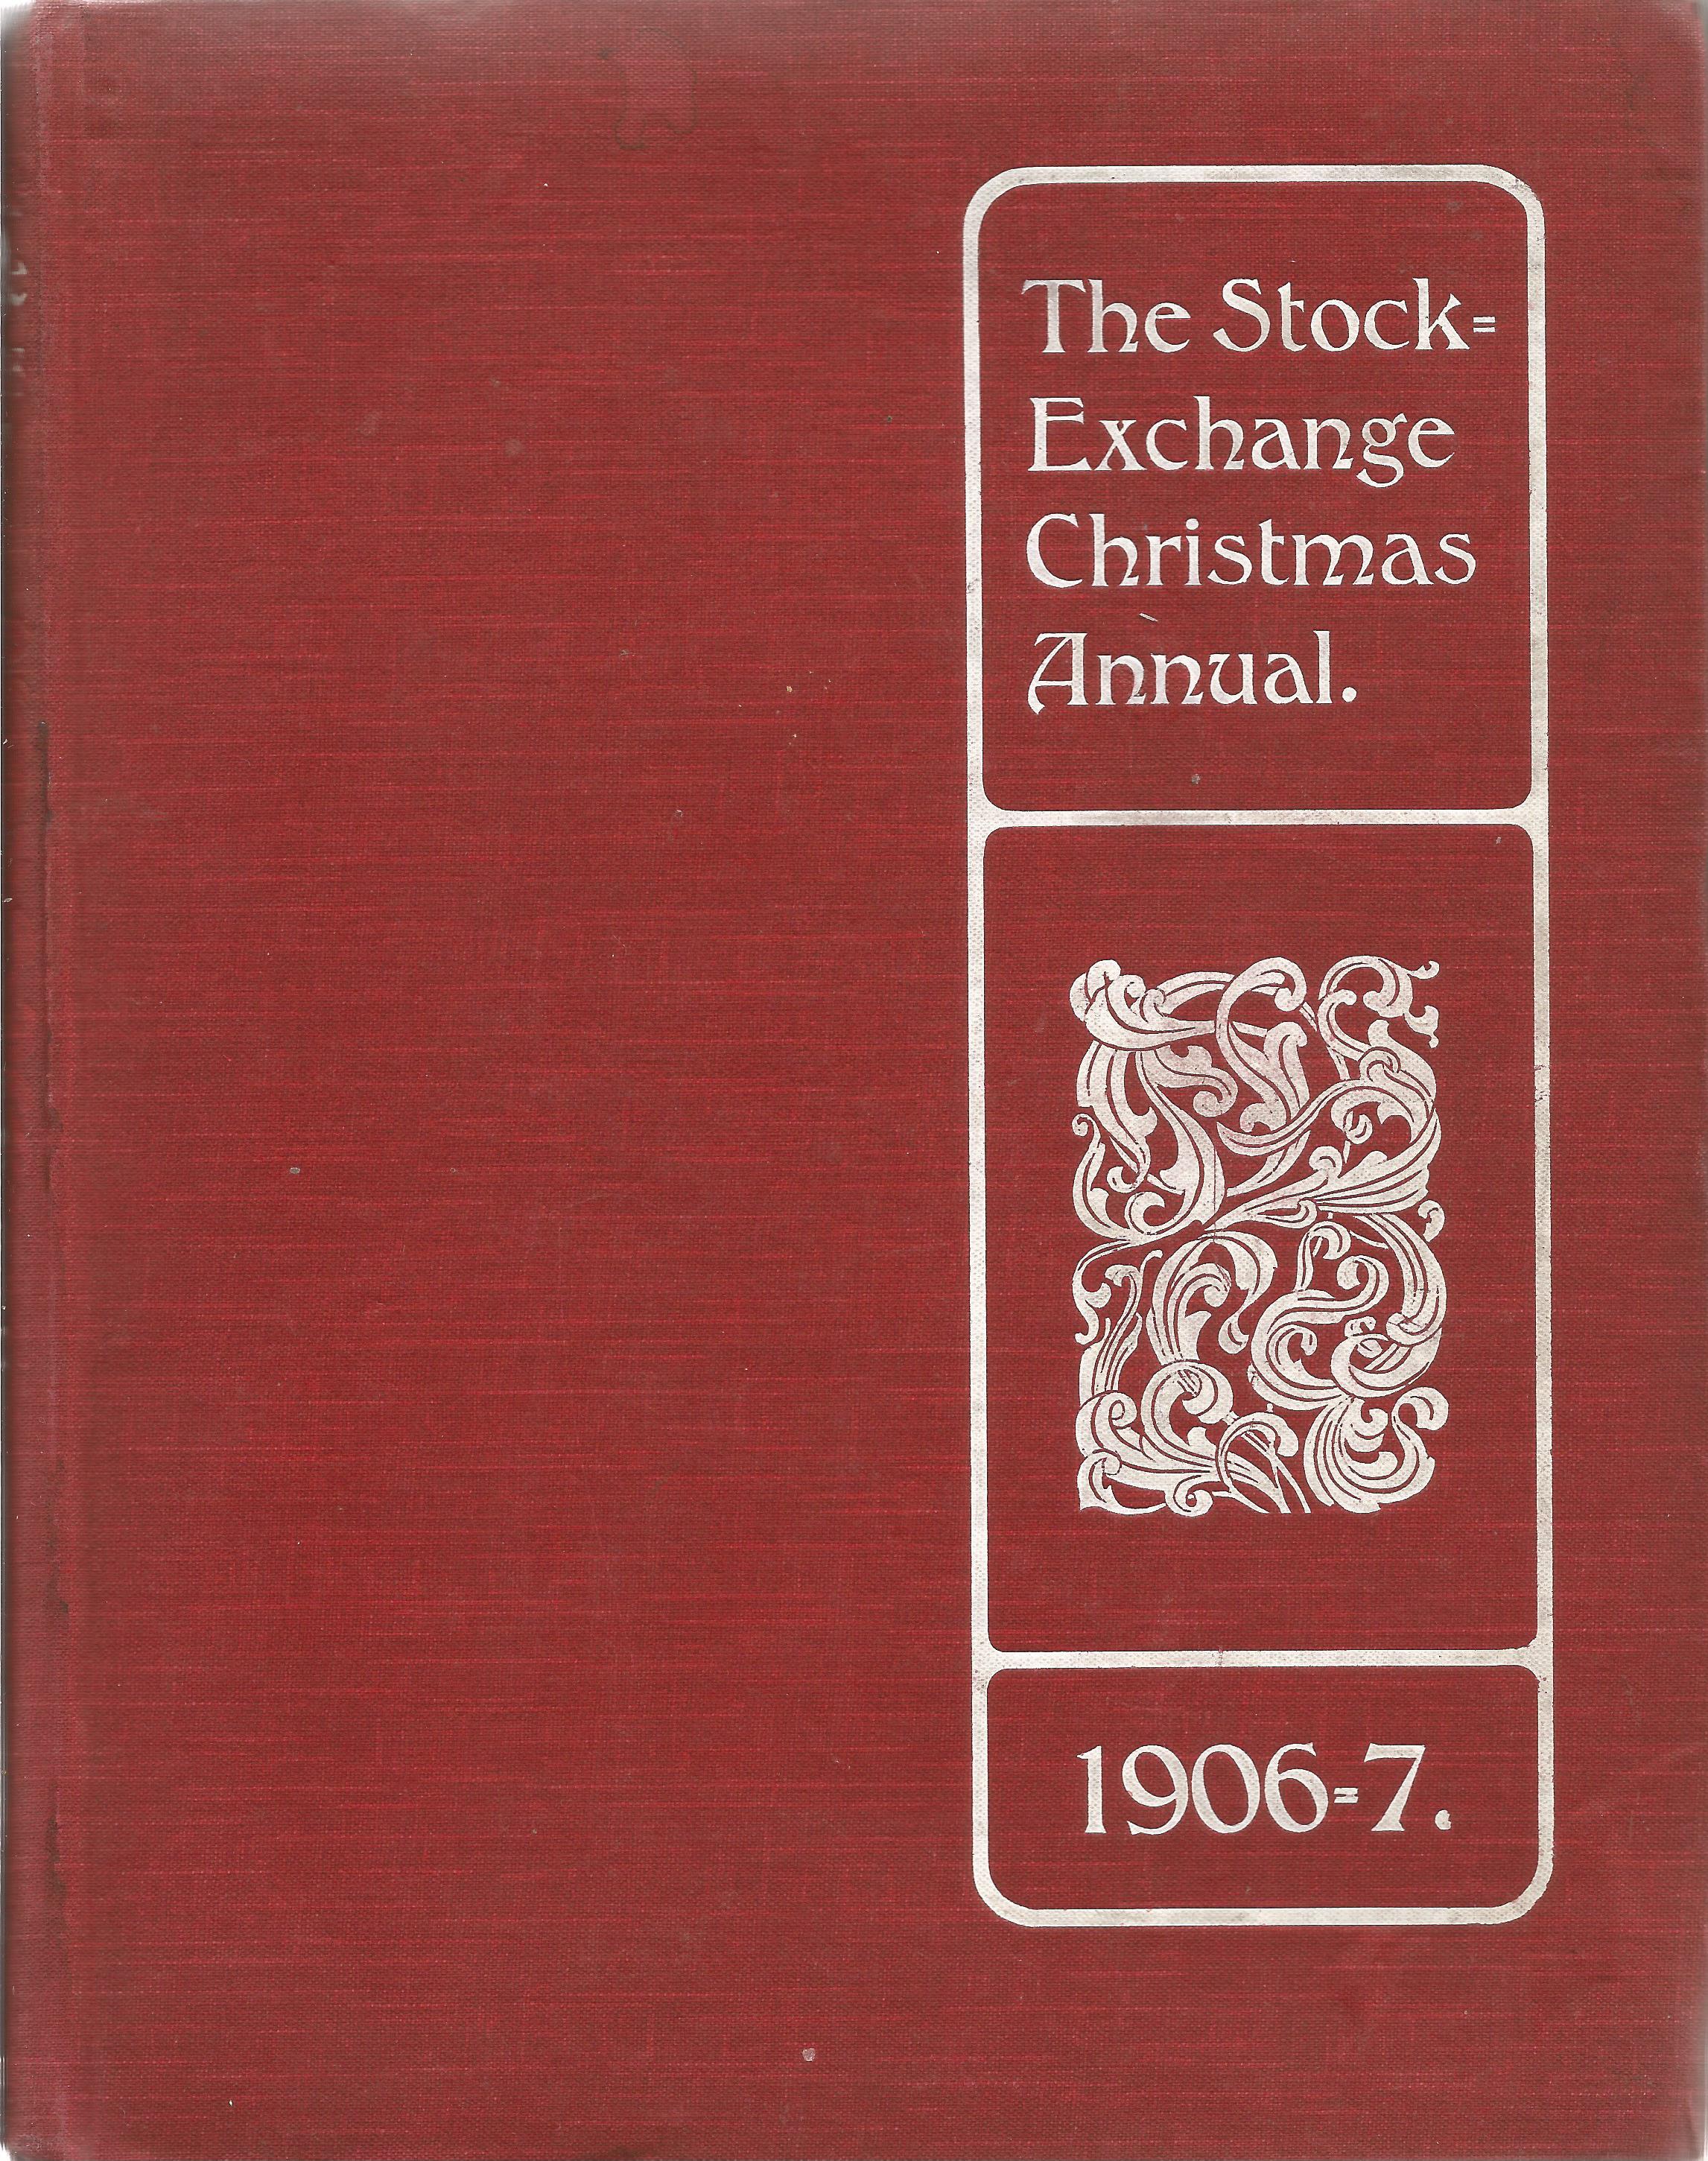 Stock Exchange Christmas Annual 1906-7 by Morgan, W.A, Hardback book with long hand written note